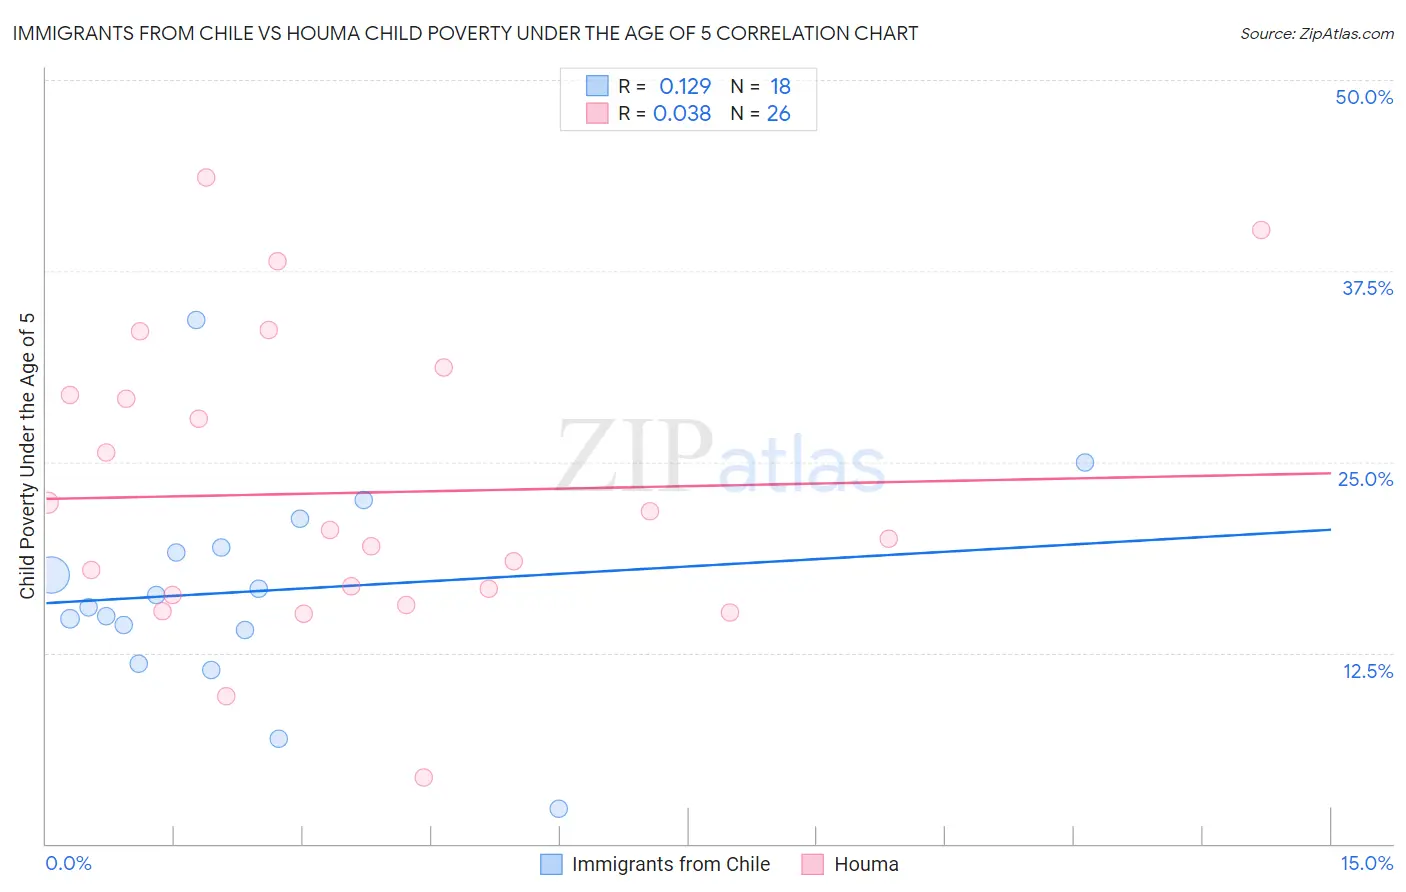 Immigrants from Chile vs Houma Child Poverty Under the Age of 5